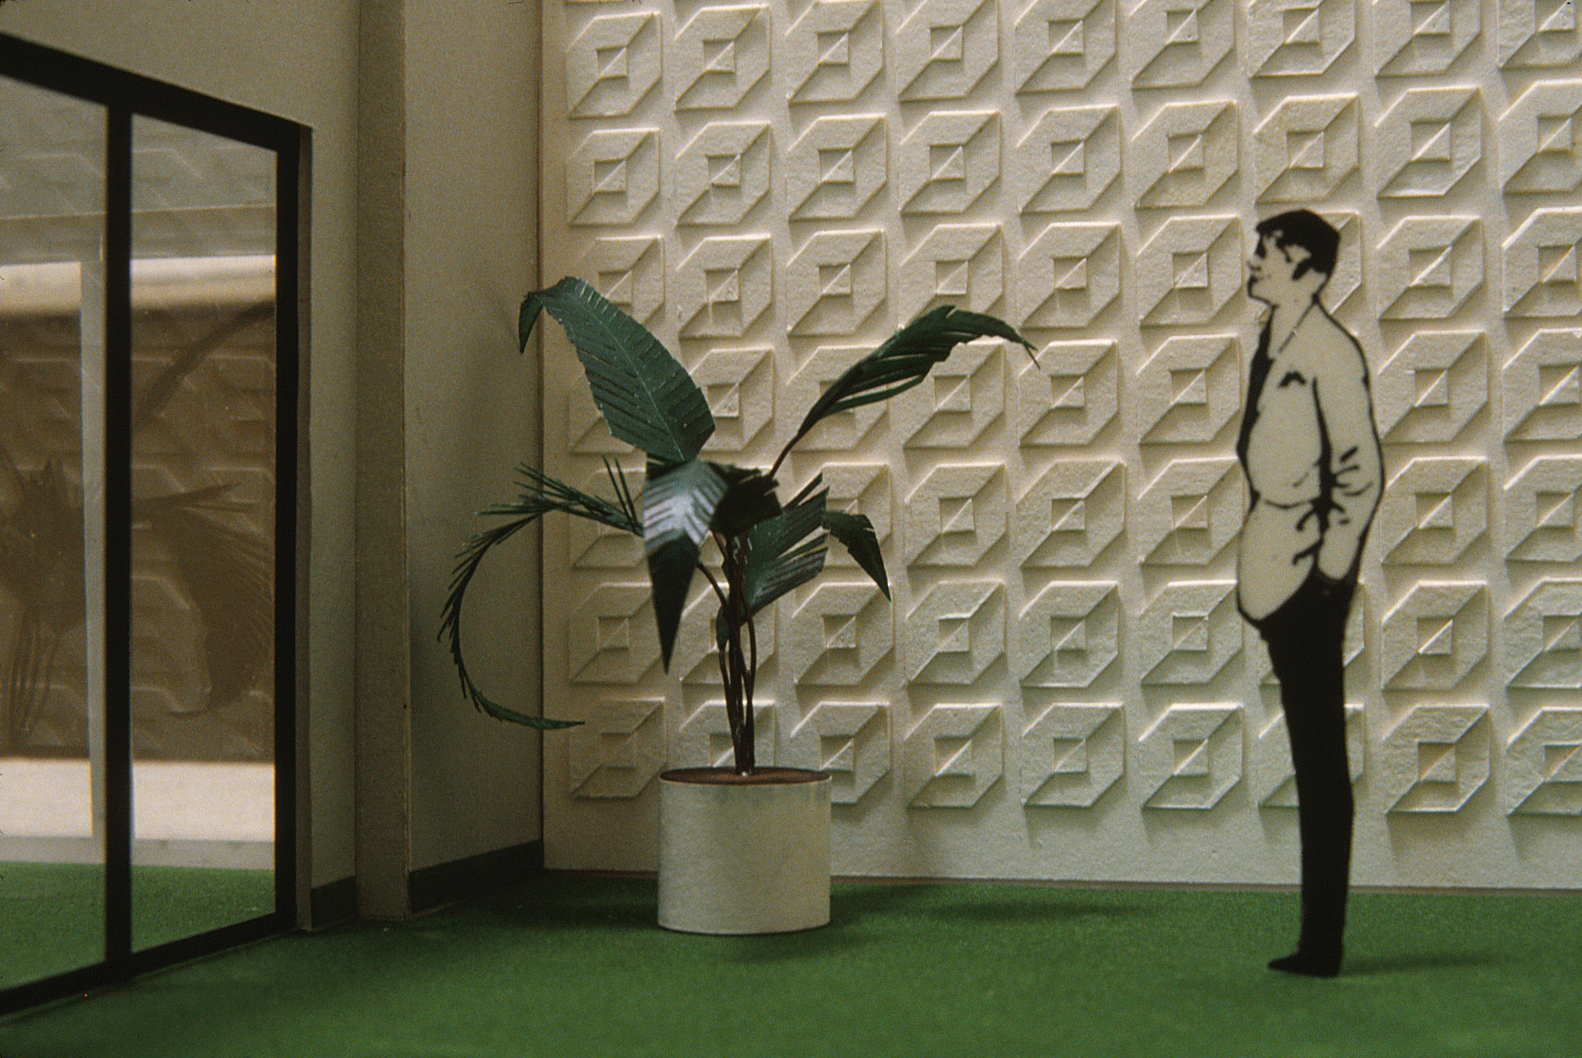 Model of an interior room in corporate headquarters featuring a repeat white on white logo on the wall, 
        with a plant, a door, and a man standing beside it.